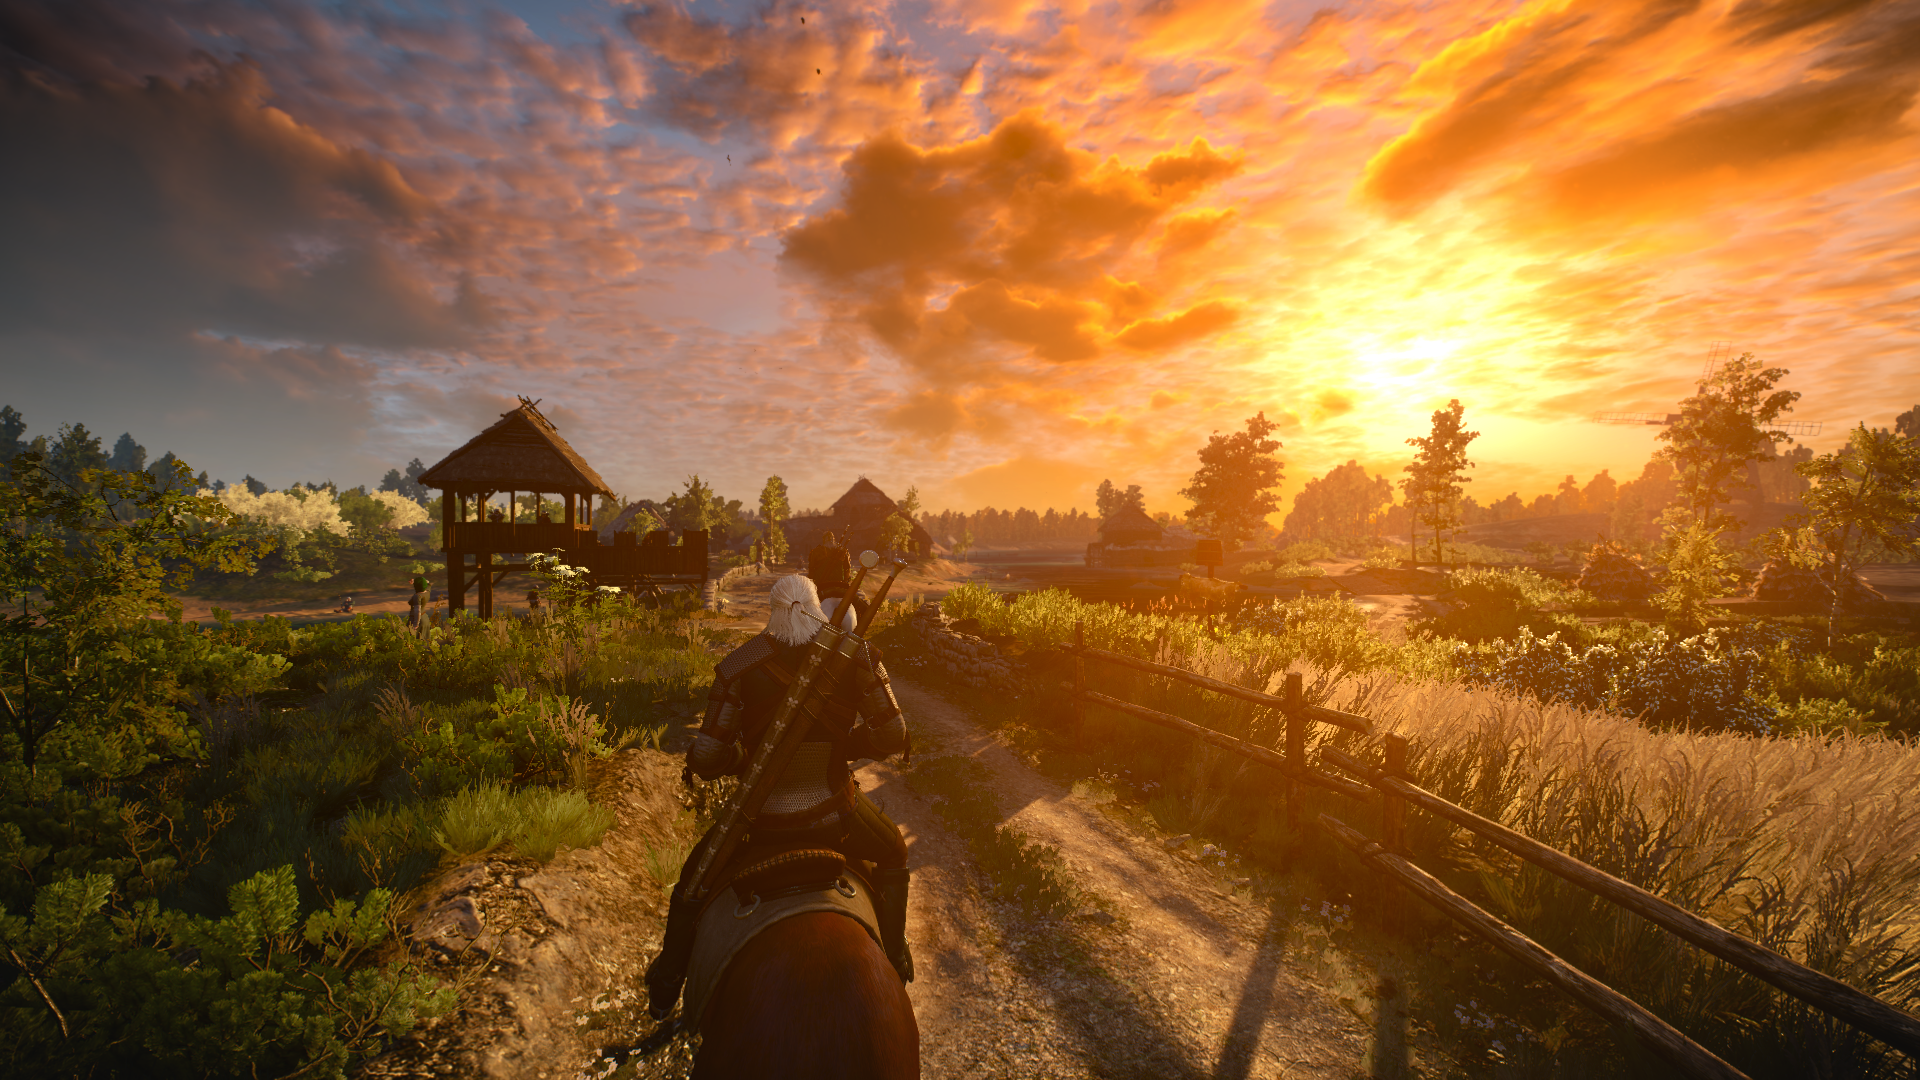 The Witcher The Witcher 3 CD Projekt RED The Witcher 3 Wild Hunt Geralt Of Rivia The White Wolf Vese 1920x1080